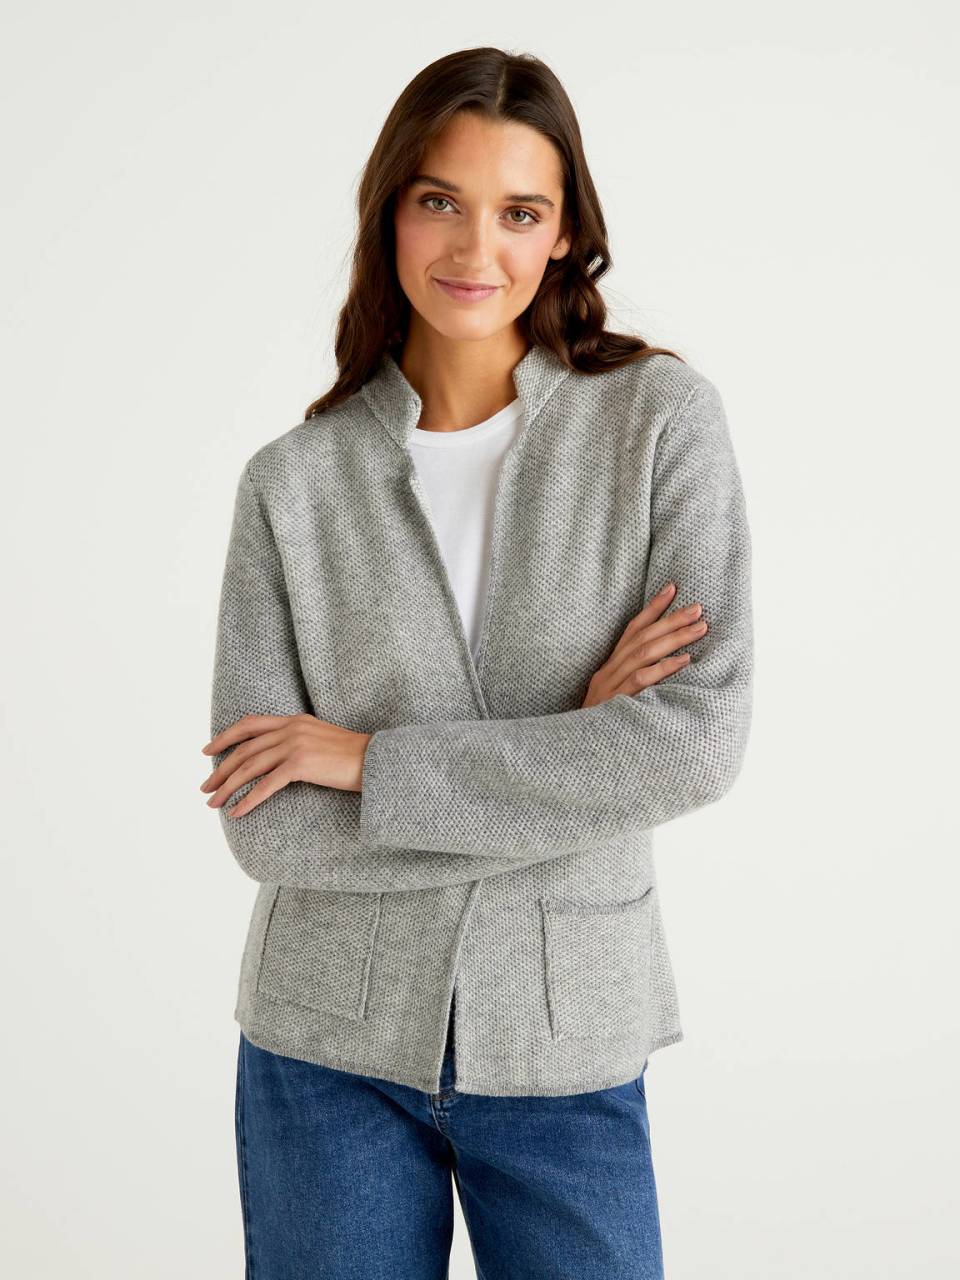 Benetton Knit jacket in wool and cashmere blend. 1